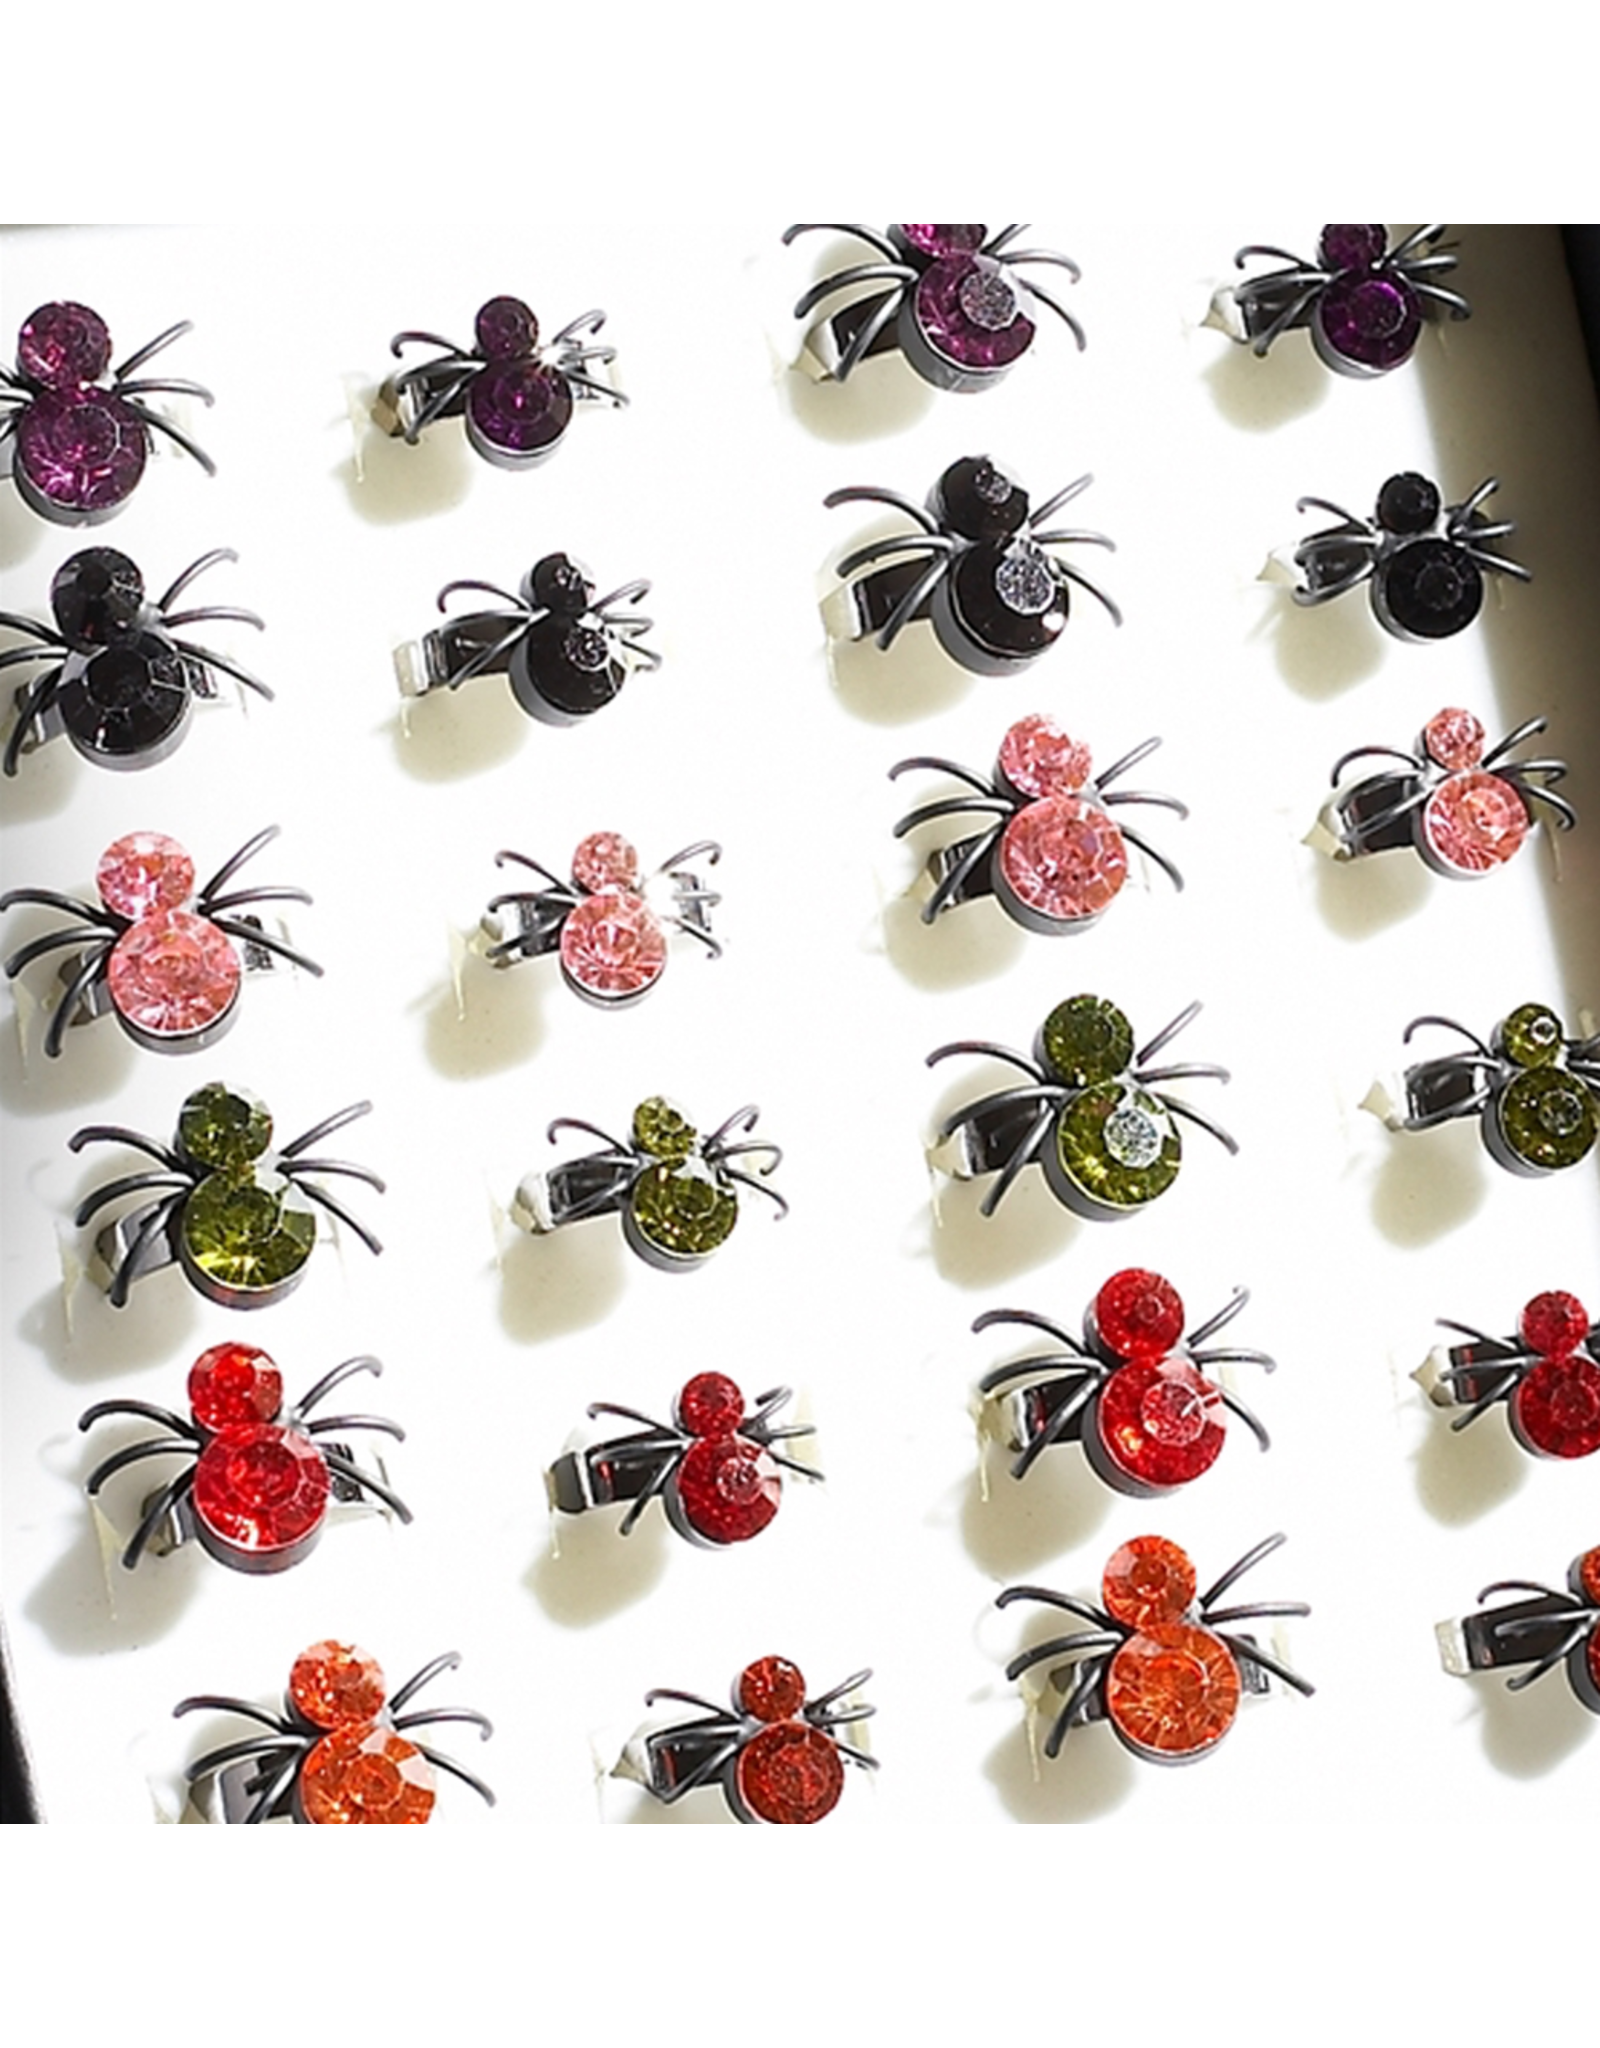 Twos Company Halloween Black Widow Bling Spider Ring .75 inch 0300-L-Black